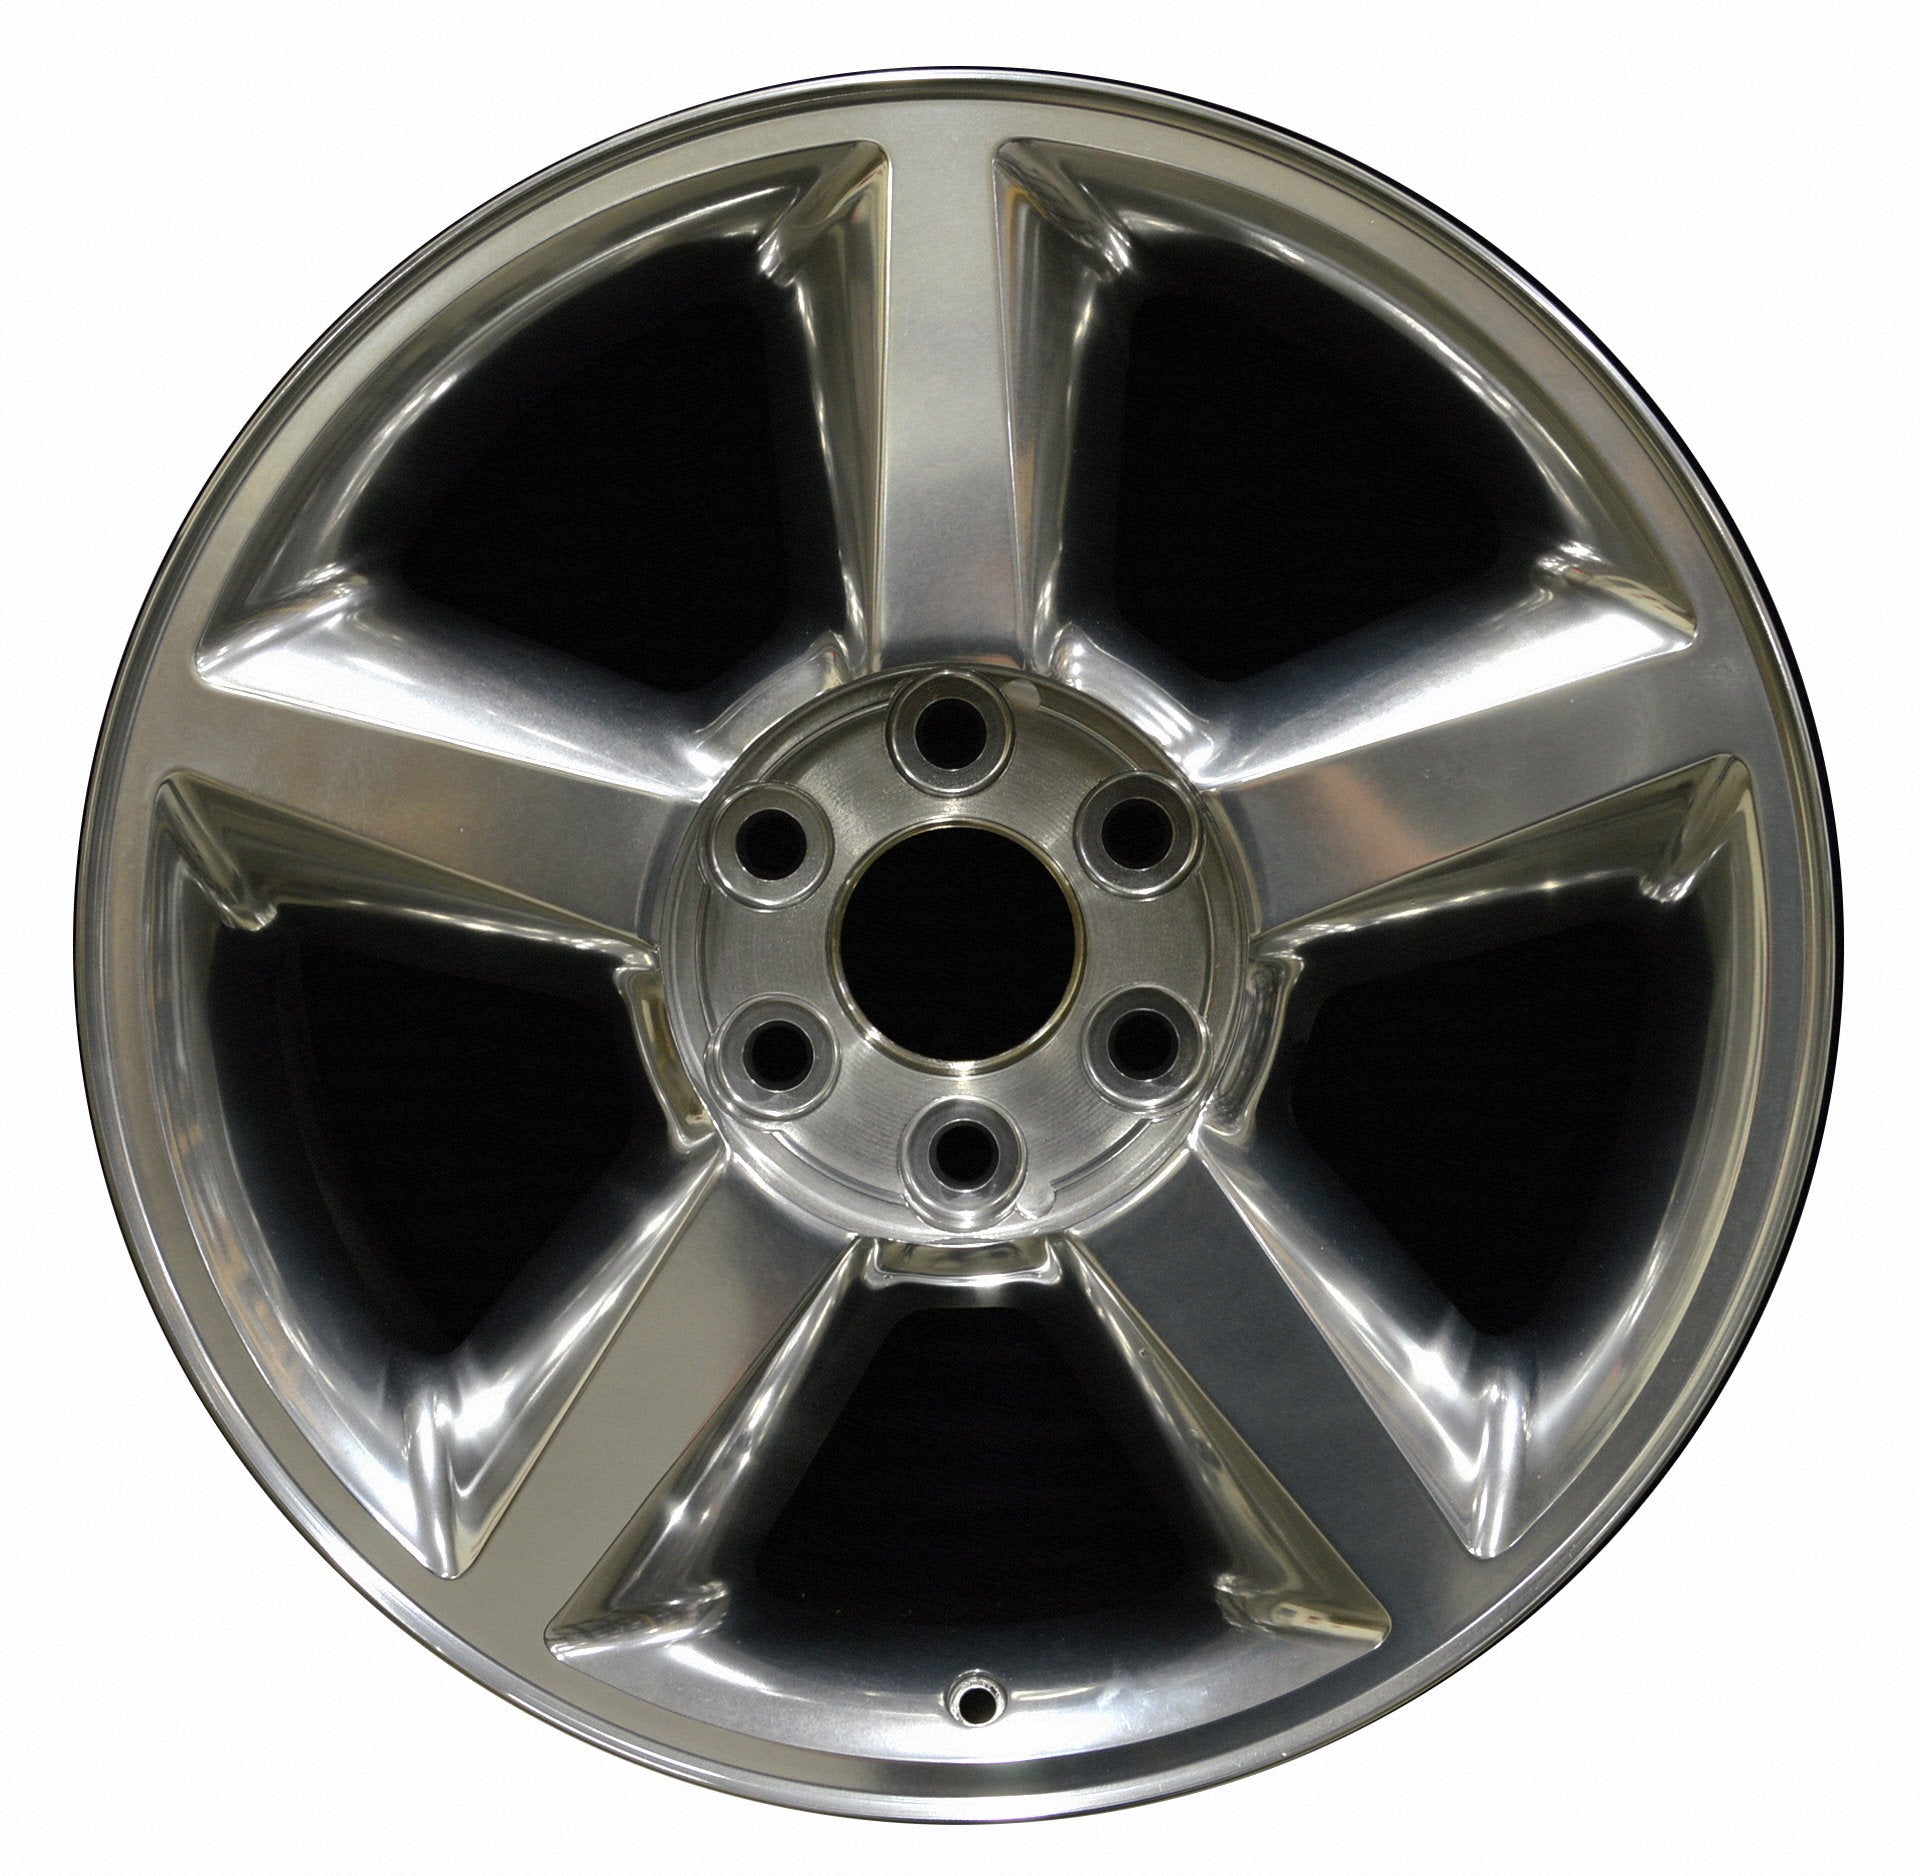 Chevrolet Avalanche  2007, 2008, 2009, 2010, 2011, 2012, 2013 Factory OEM Car Wheel Size 20x8.5 Alloy WAO.5308A.FULL.POL